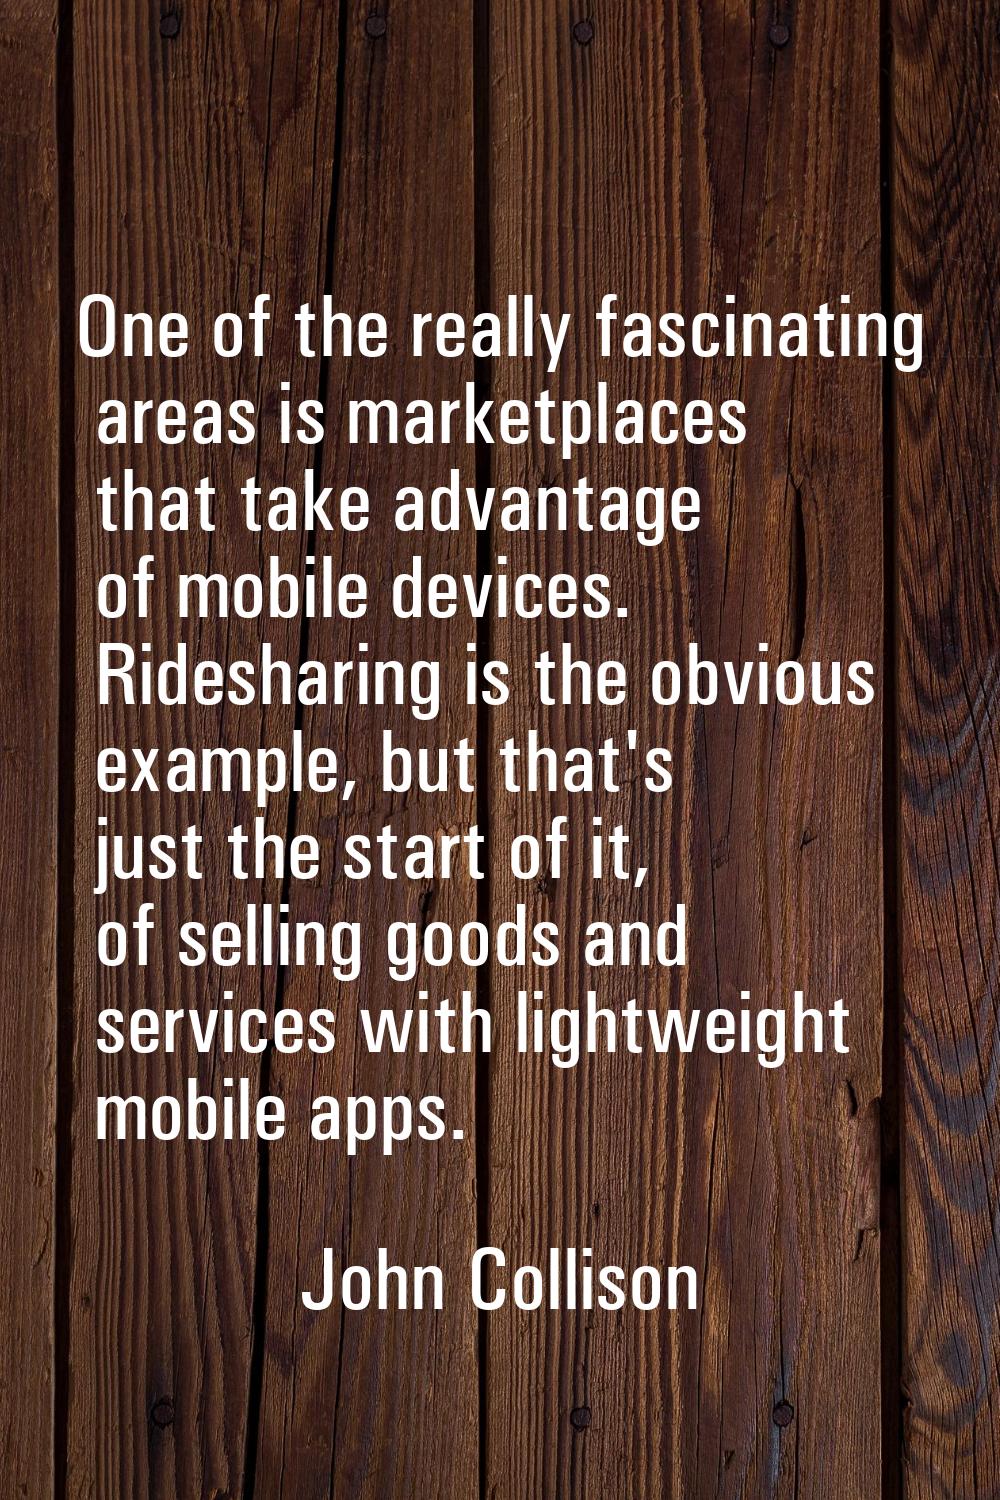 One of the really fascinating areas is marketplaces that take advantage of mobile devices. Rideshar